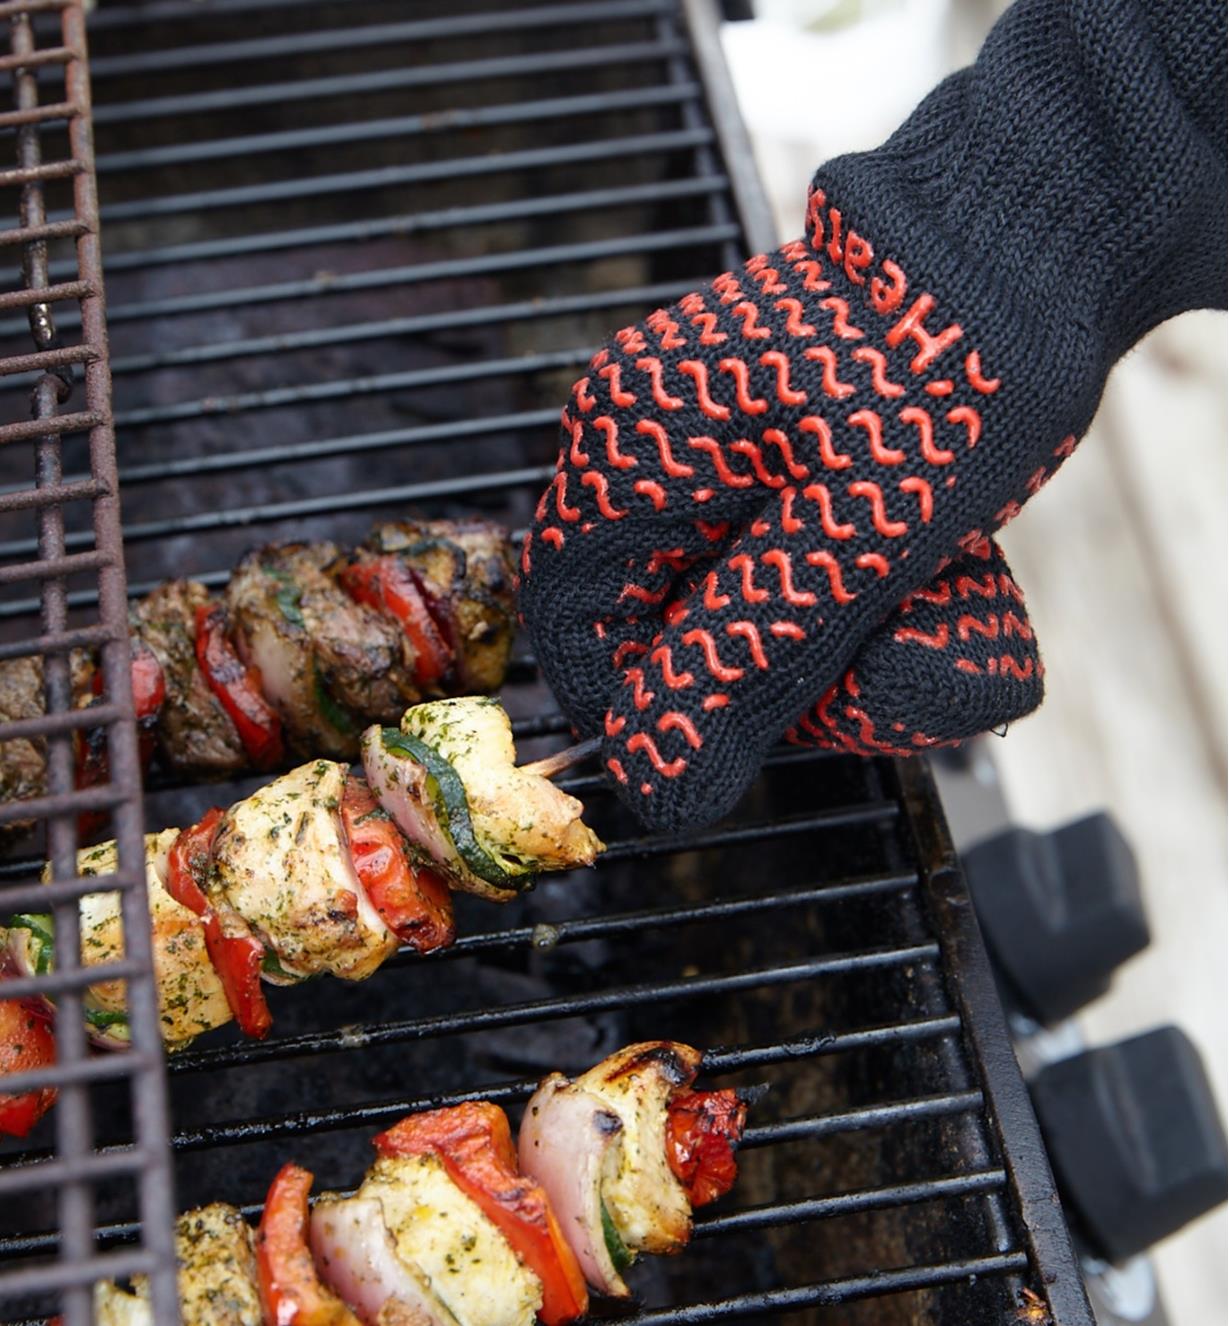 Wearing barbecue gloves to turn skewers on barbecue.